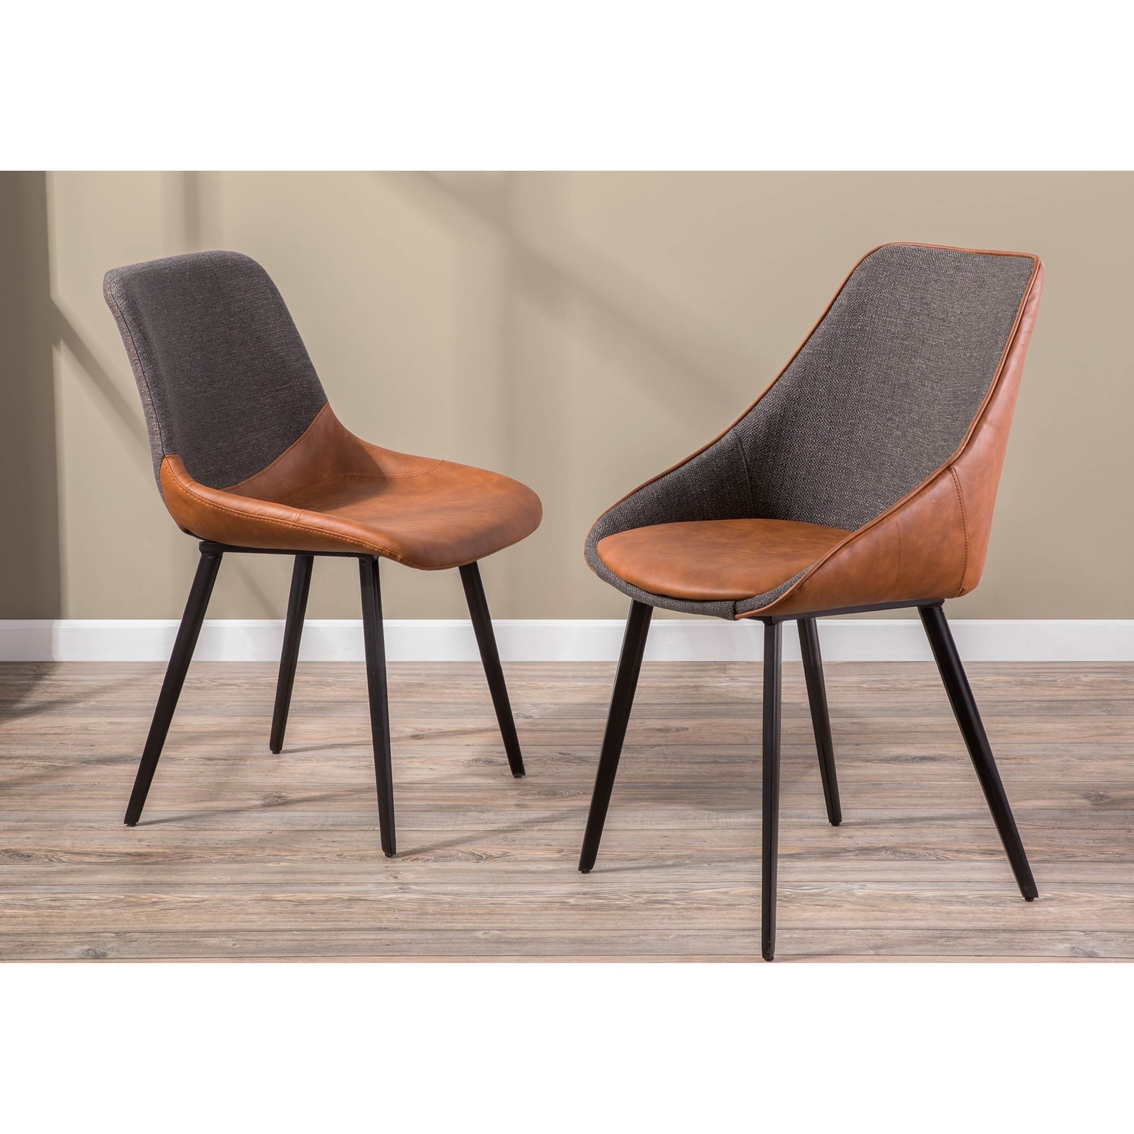 LumiSource Outlaw Two Tone Chair 2 pk. - Image 2 of 3